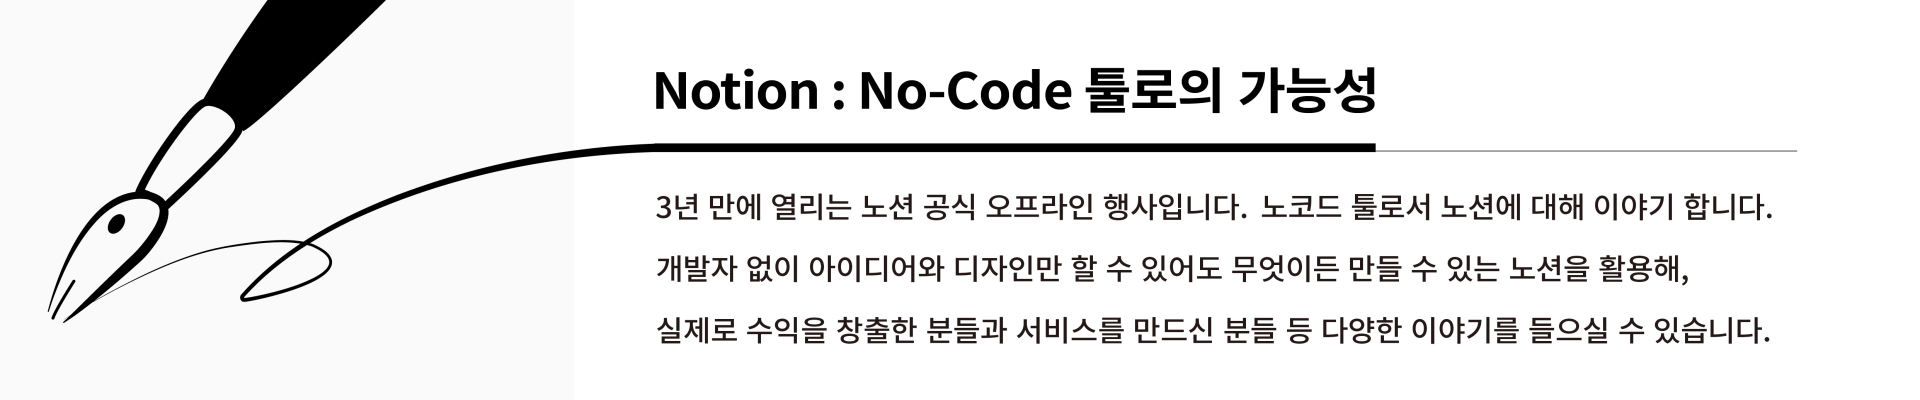 Notion for No-Code Tool 세미나